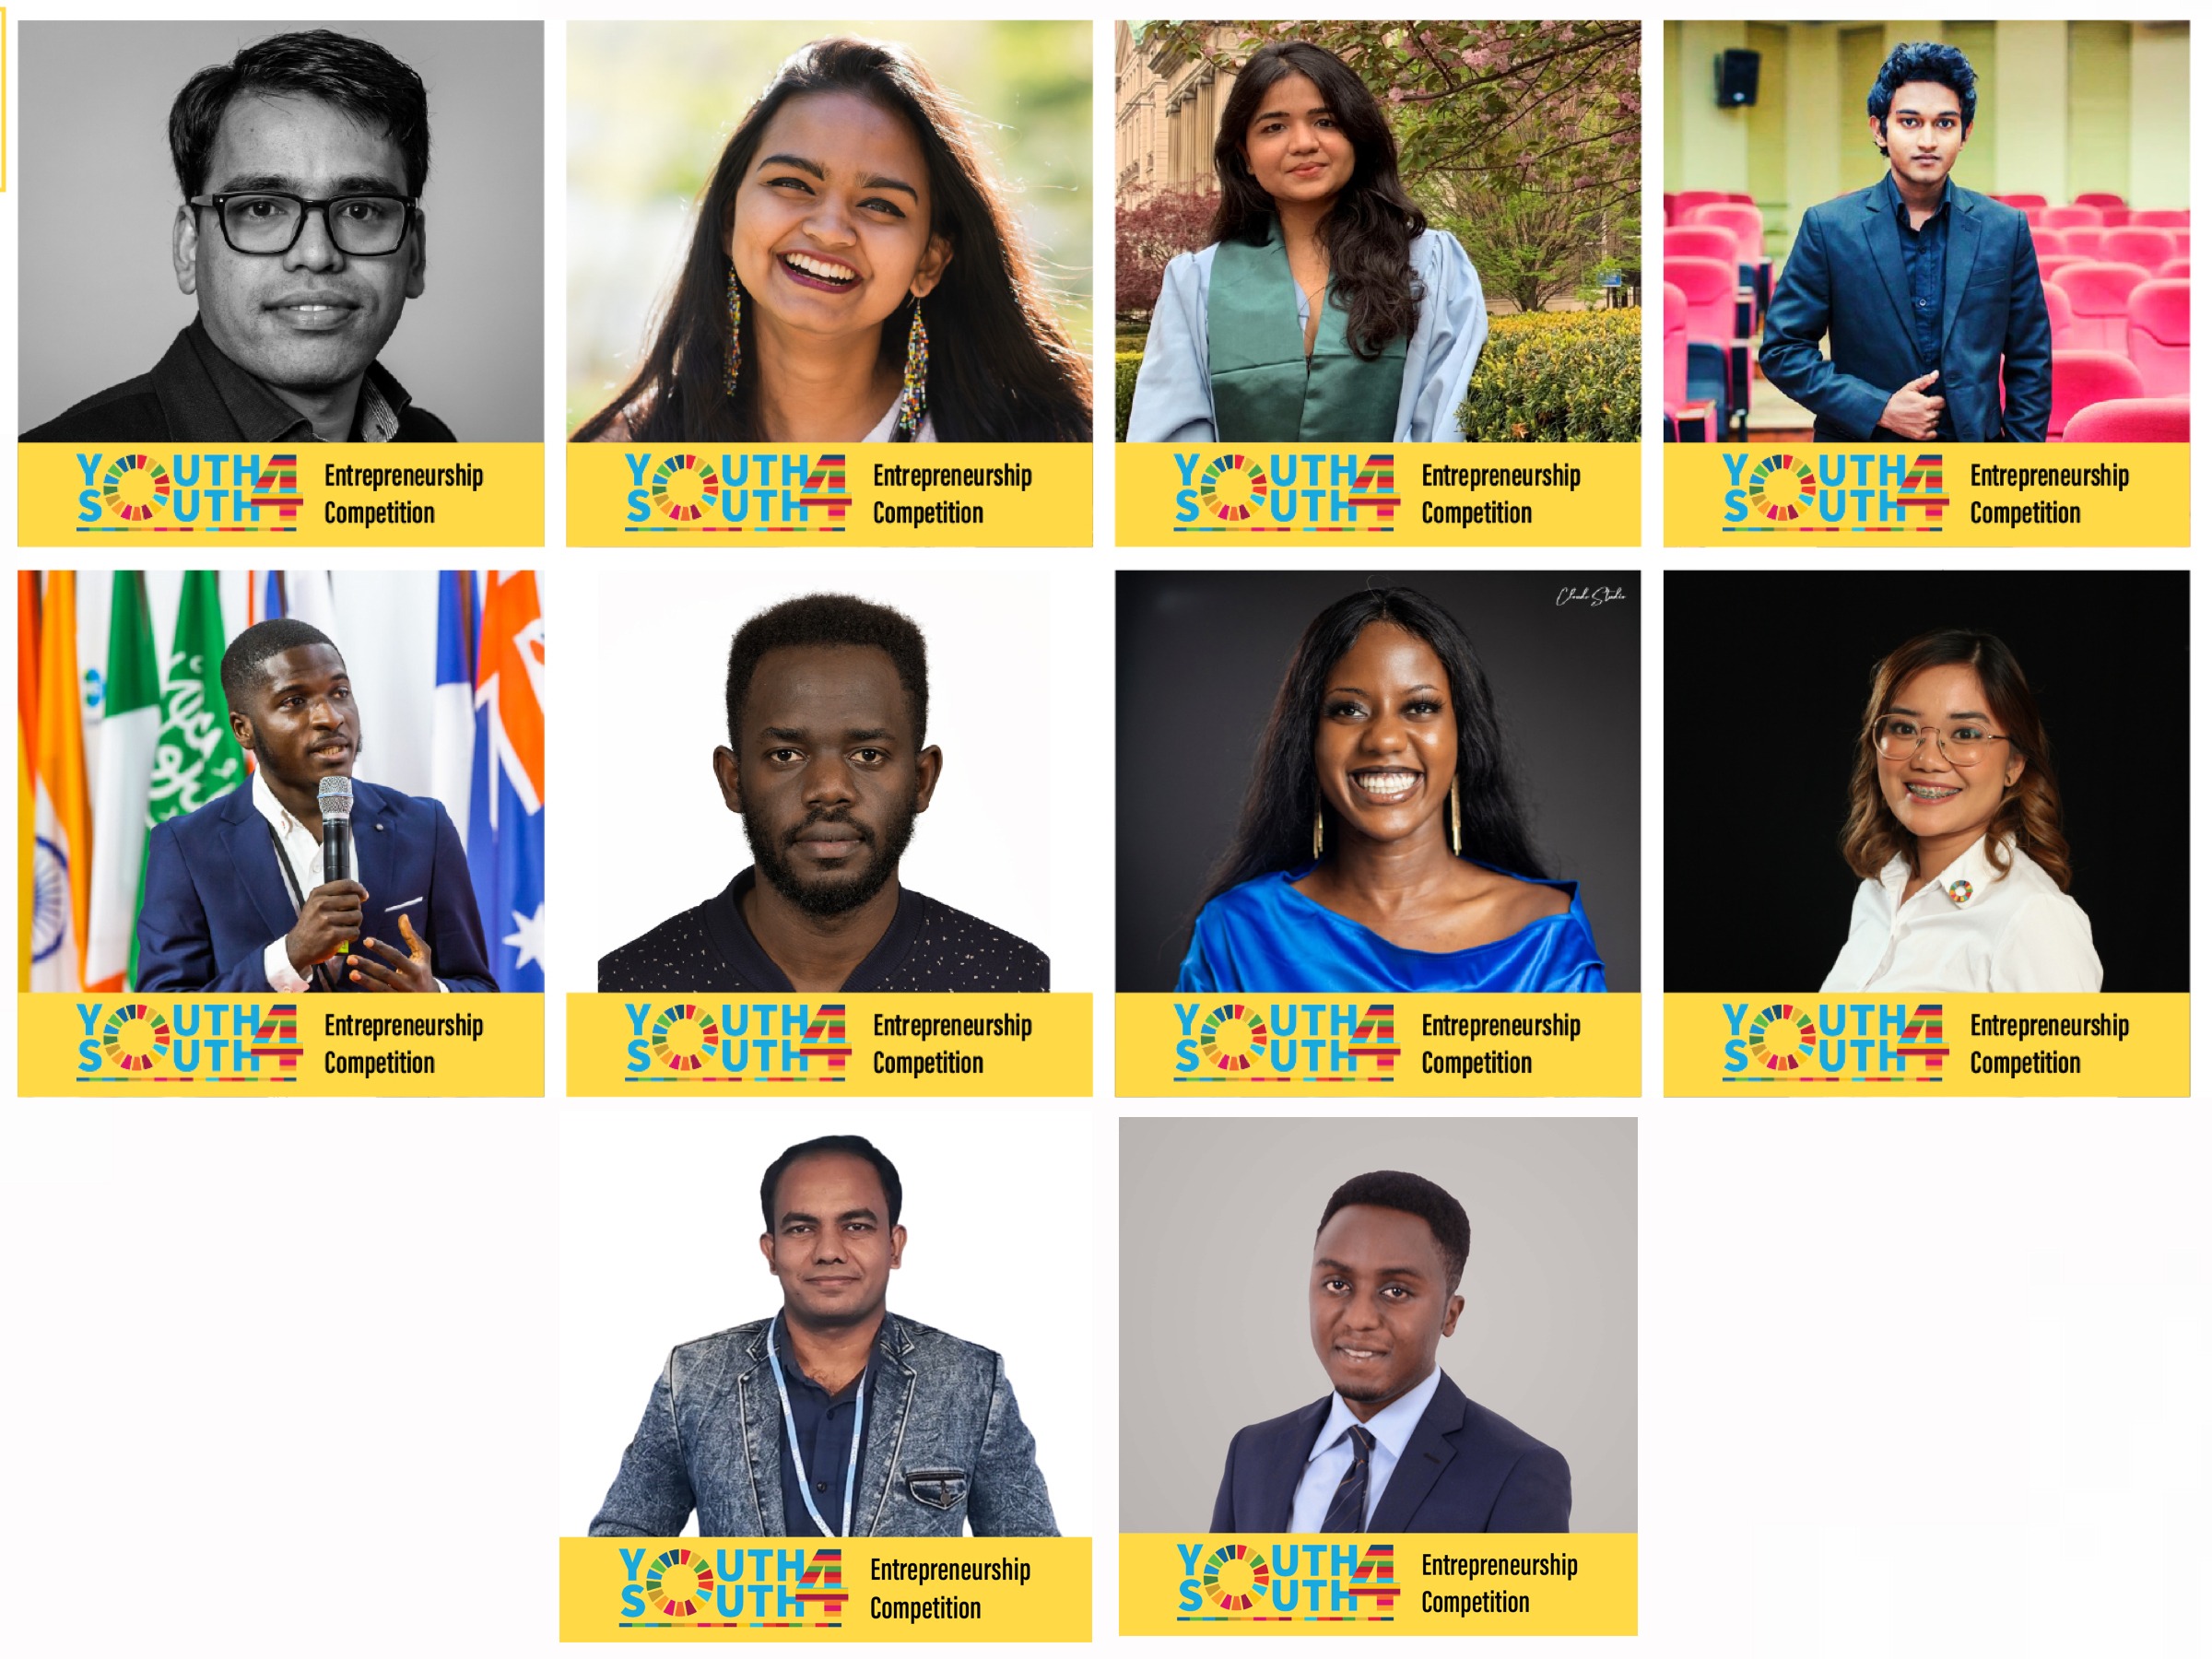 Top Youth Entrepreneurs Selected for Final Youth4South Entrepreneurship Competition, to be held in Bangkok in September